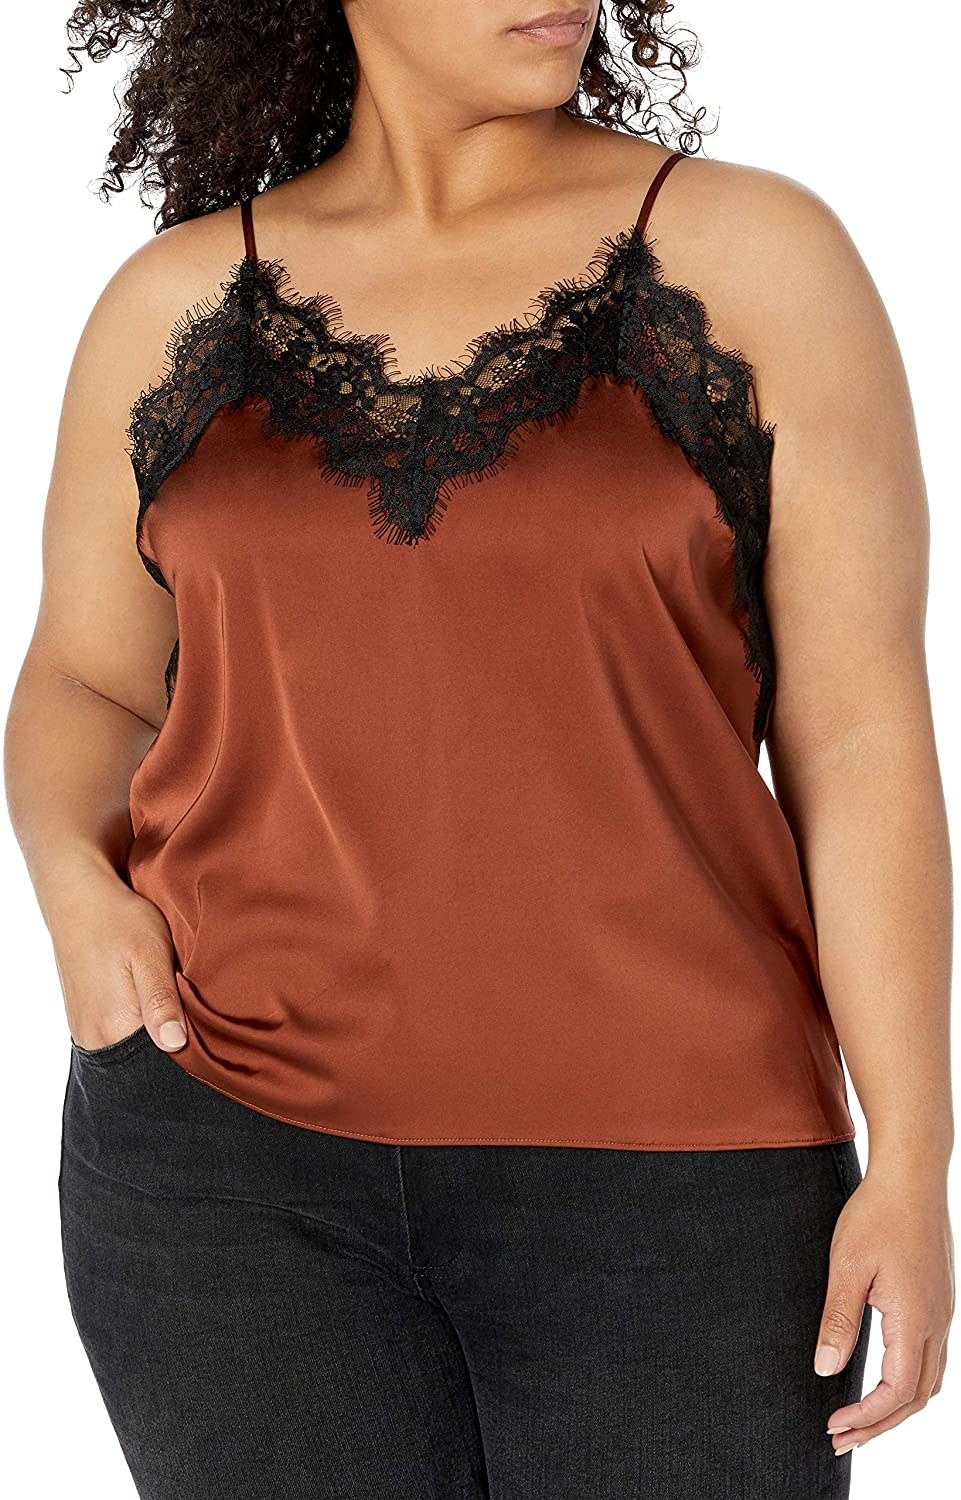 model wearing the orange tank with black lace 